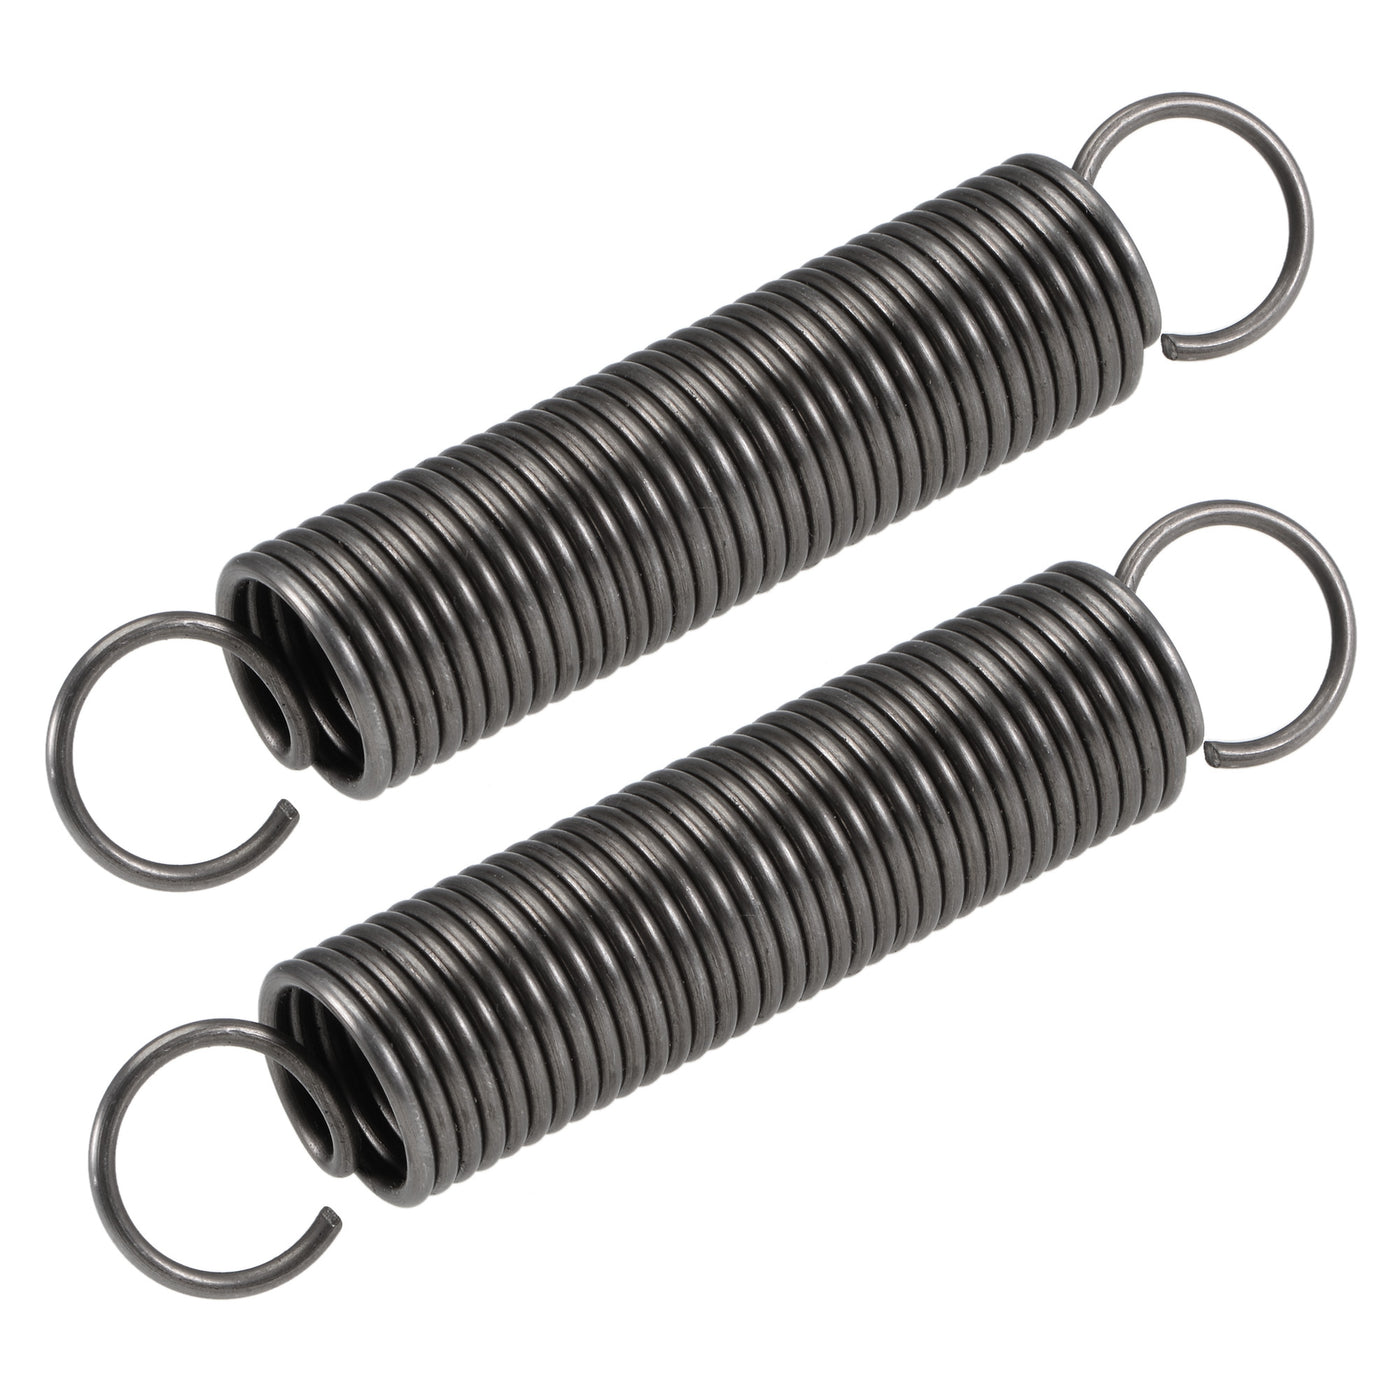 Uxcell Uxcell 2mmx20mmx120mm Extended Compression Spring ,17.3Lbs Load Capacity,Grey 2pcs